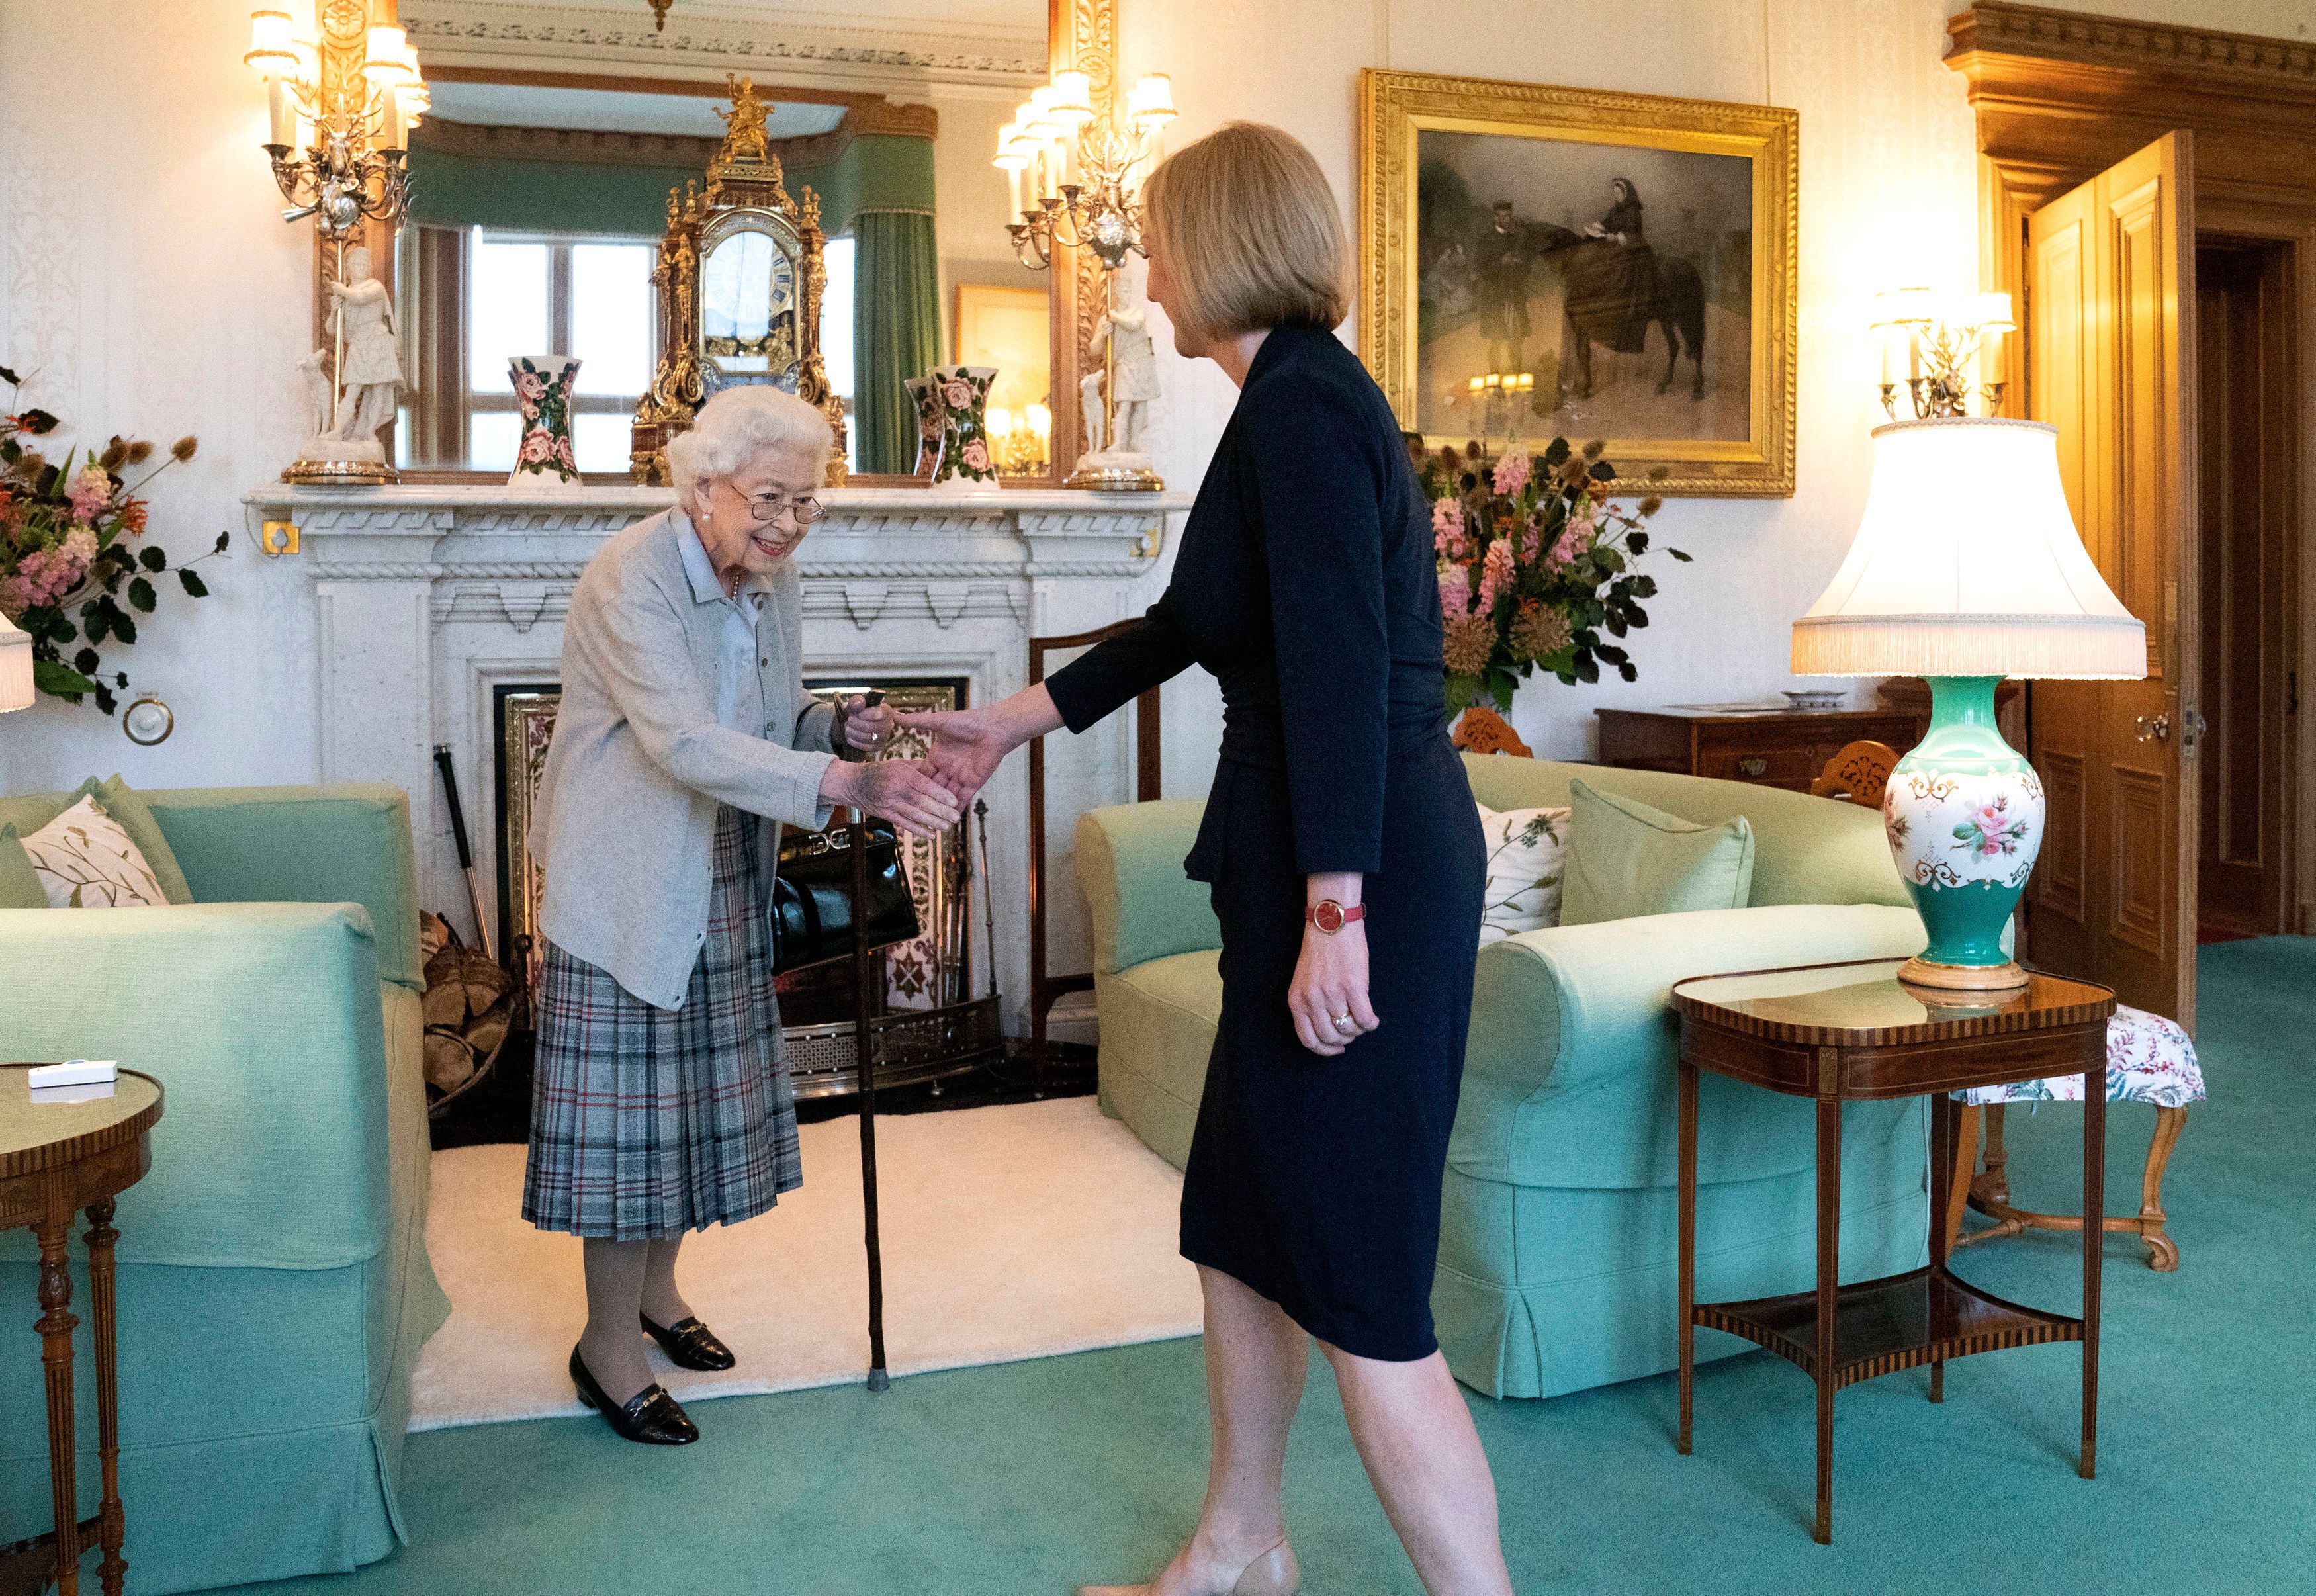 <p>For the first time in her 70-year reign, Britain's Queen Elizabeth II appointed a new prime minister not while in London but from her home in Scotland. Her Majesty welcomed Liz Truss -- who replaced Boris Johnson -- on Sept. 6, 2022, during an audience at Balmoral, her estate in the Highlands, where she invited the newly elected leader of the Conservative party to become prime minister and form a new government. The reason for the big change? The monarch, who spent her summers in Scotland, was experiencing ongoing health and mobility issues so the decision was made to bring the politician to her. This marked the last time Her Majester was publicly photographed: She died two days later.</p>